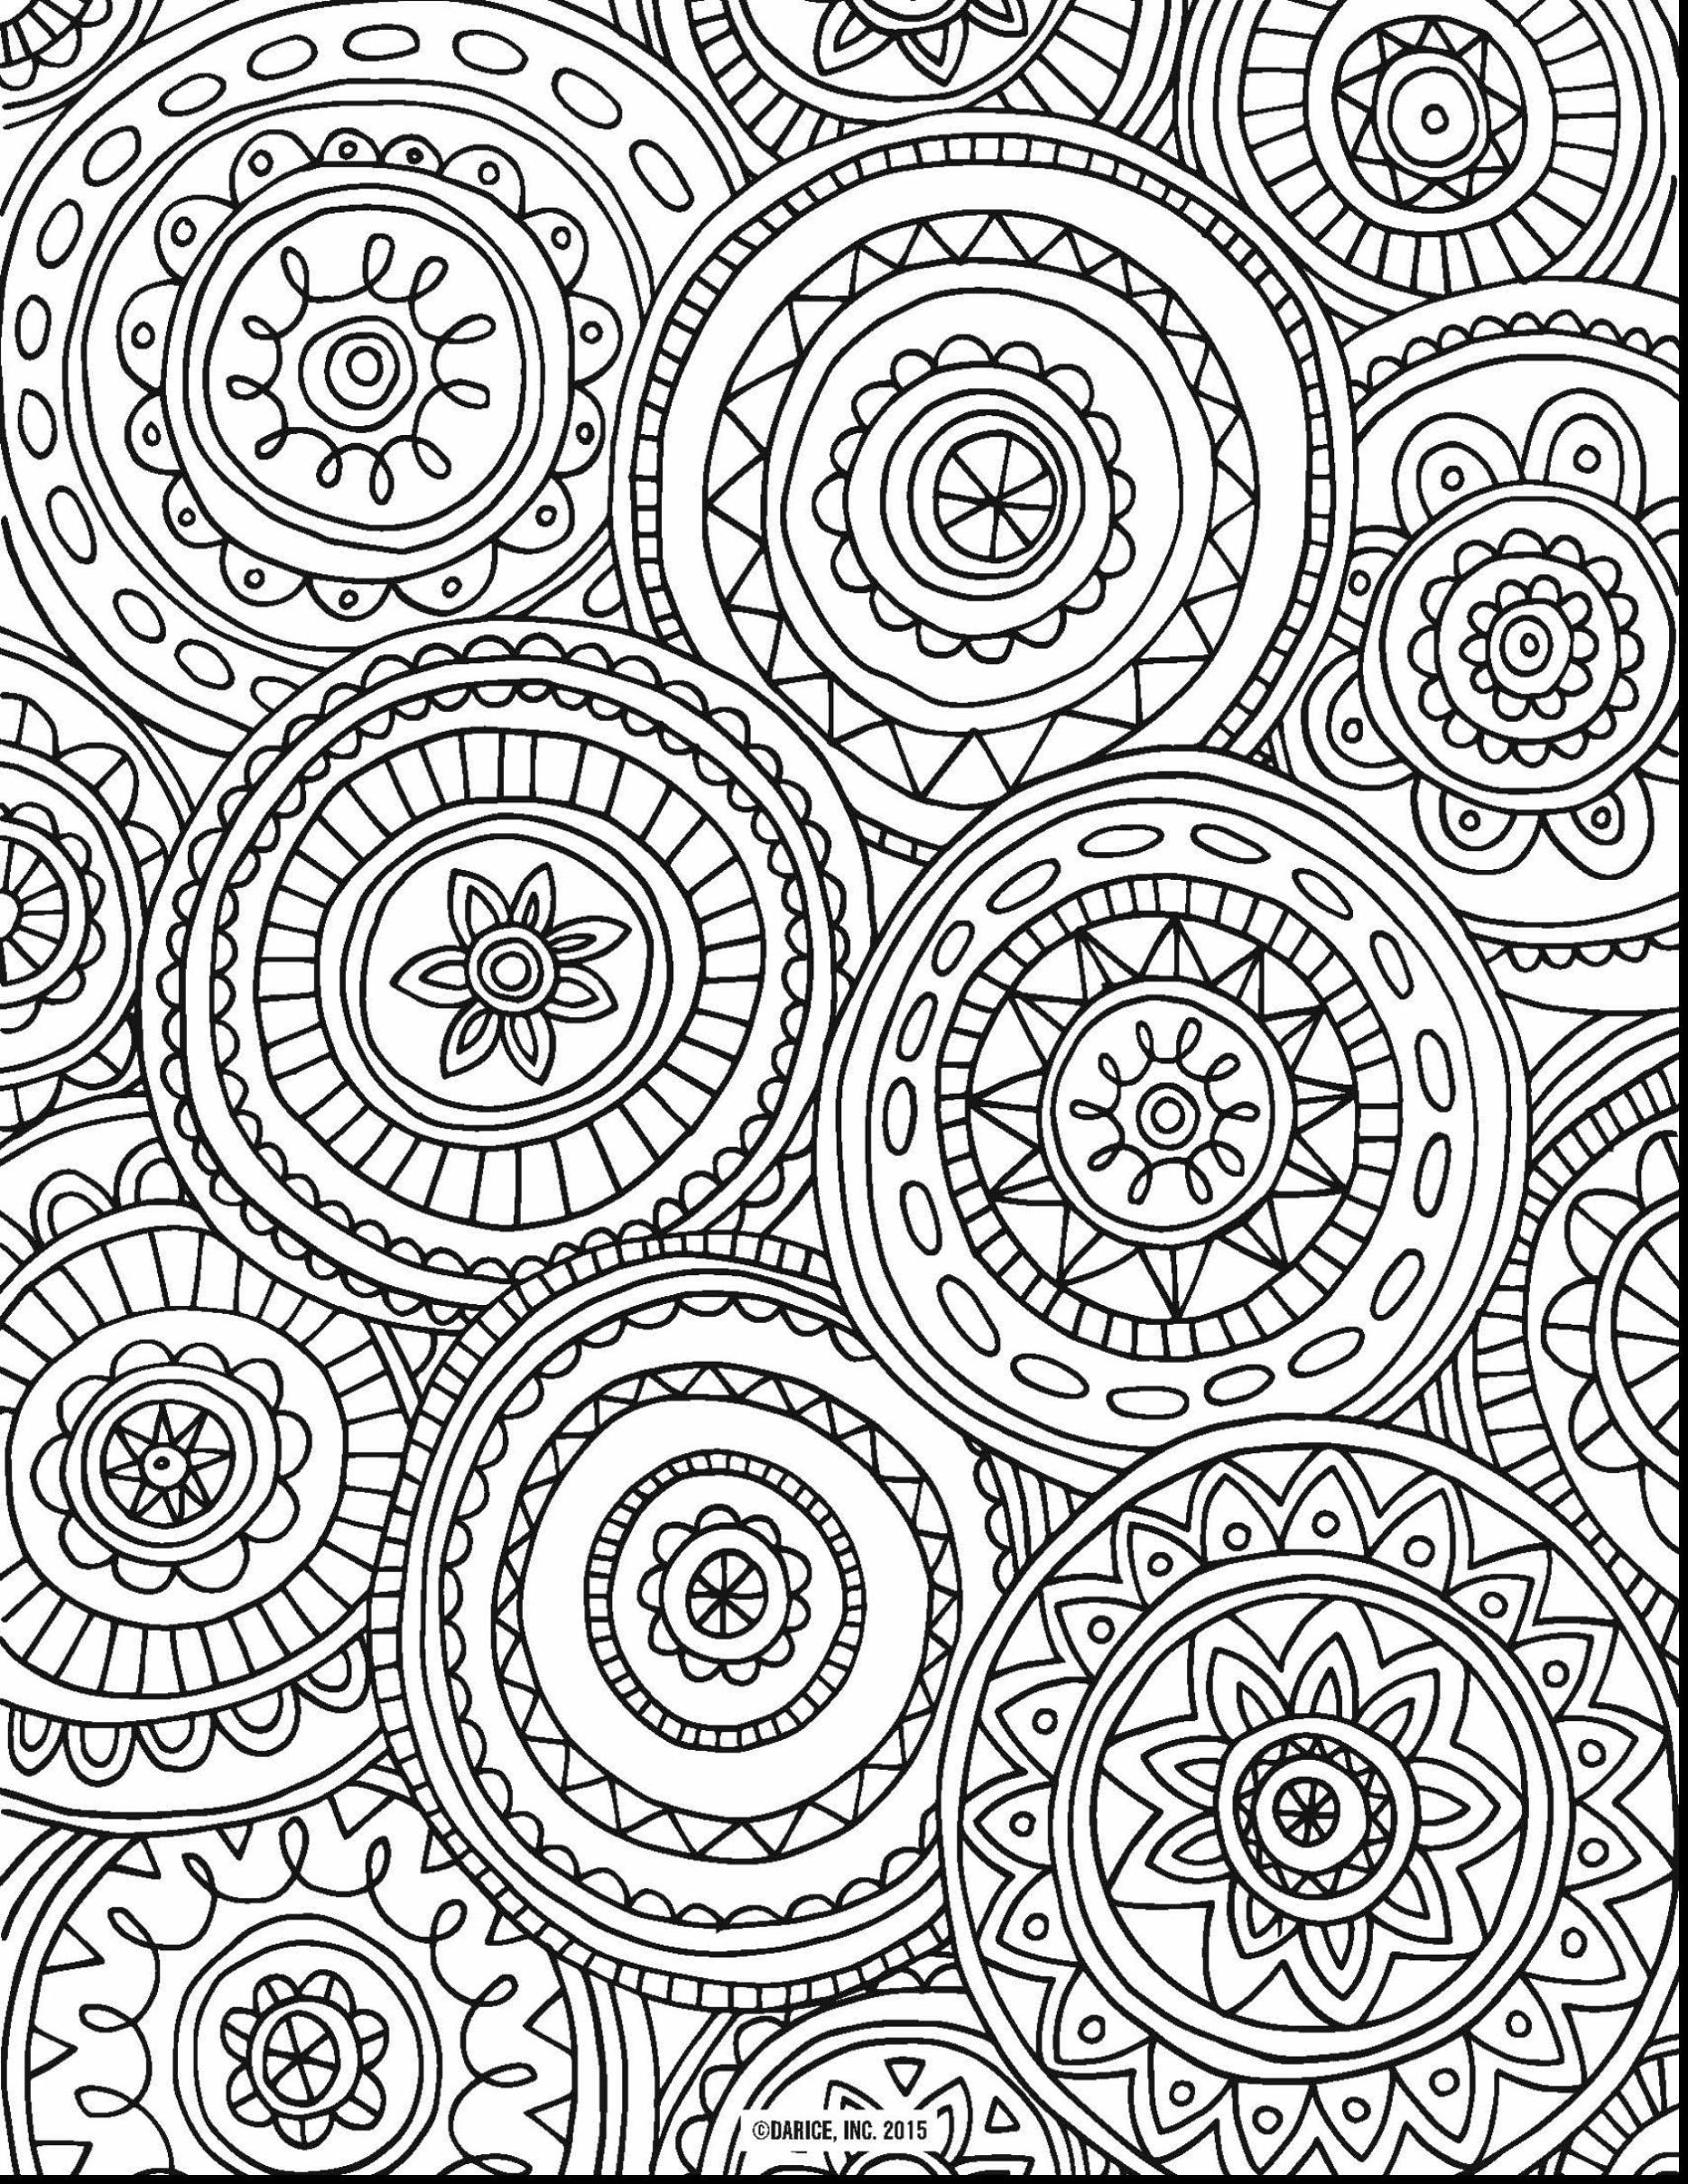 Best Of Free Printable Mandala Coloring Pages For Adults Pdf - Free Printable Mandala Coloring Pages For Adults